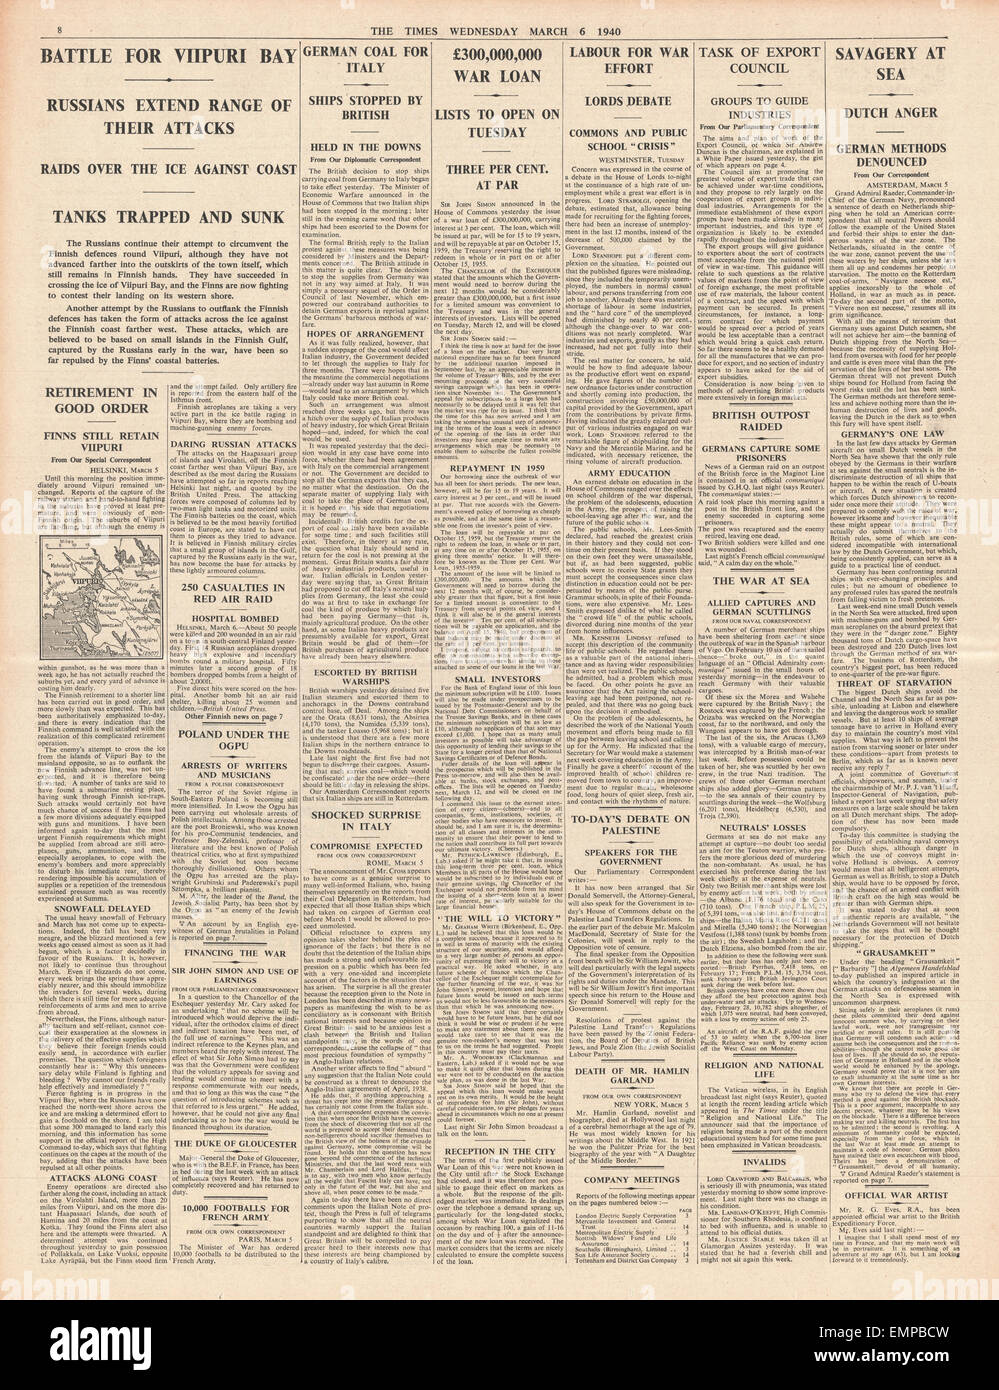 1940 page 8 The Times Battle for Viipuri Bay in Finland, Coal embargo in Italy, Dutch anger on German actions against shipping Stock Photo